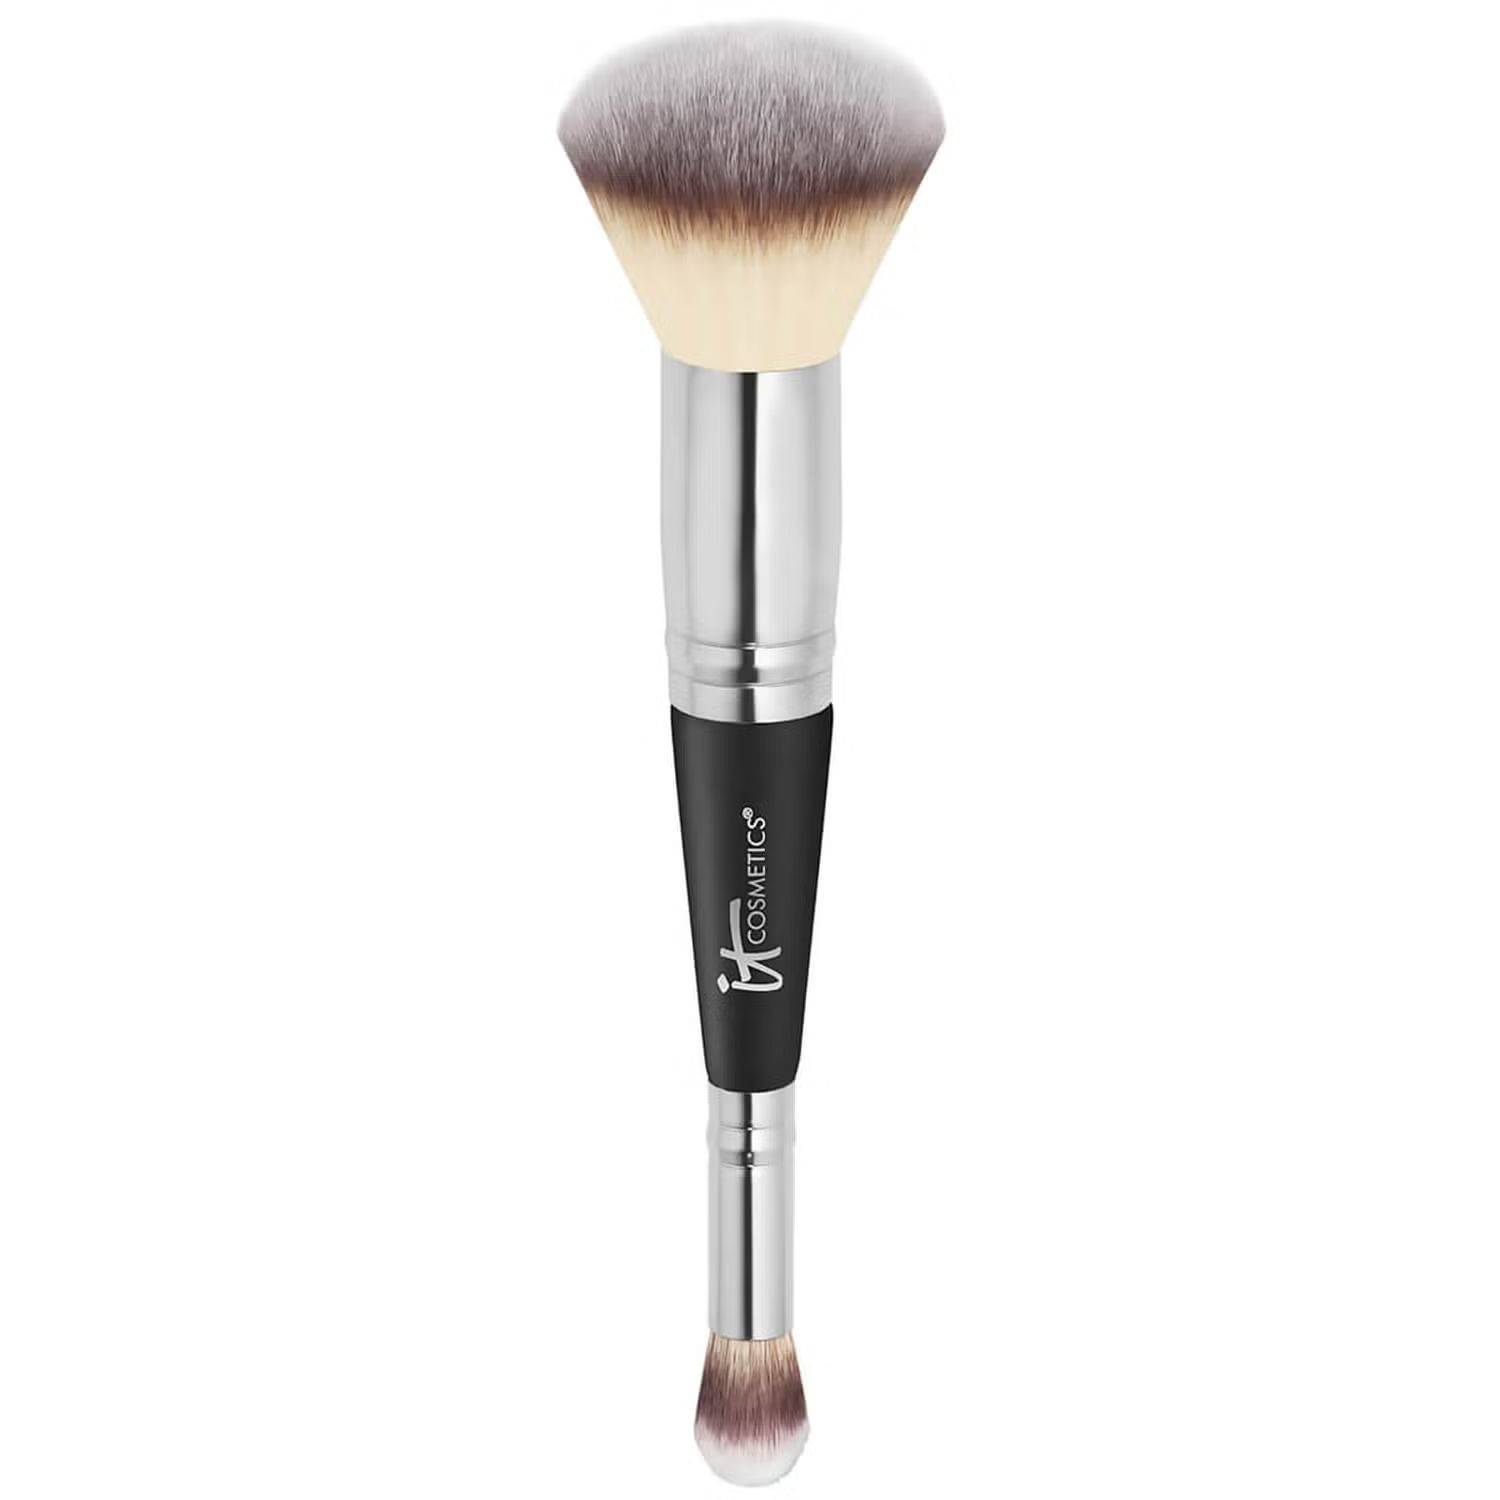 IT Cosmetics Heavenly Luxe Complexion Perfection Brush #7 | Look Fantastic (UK)